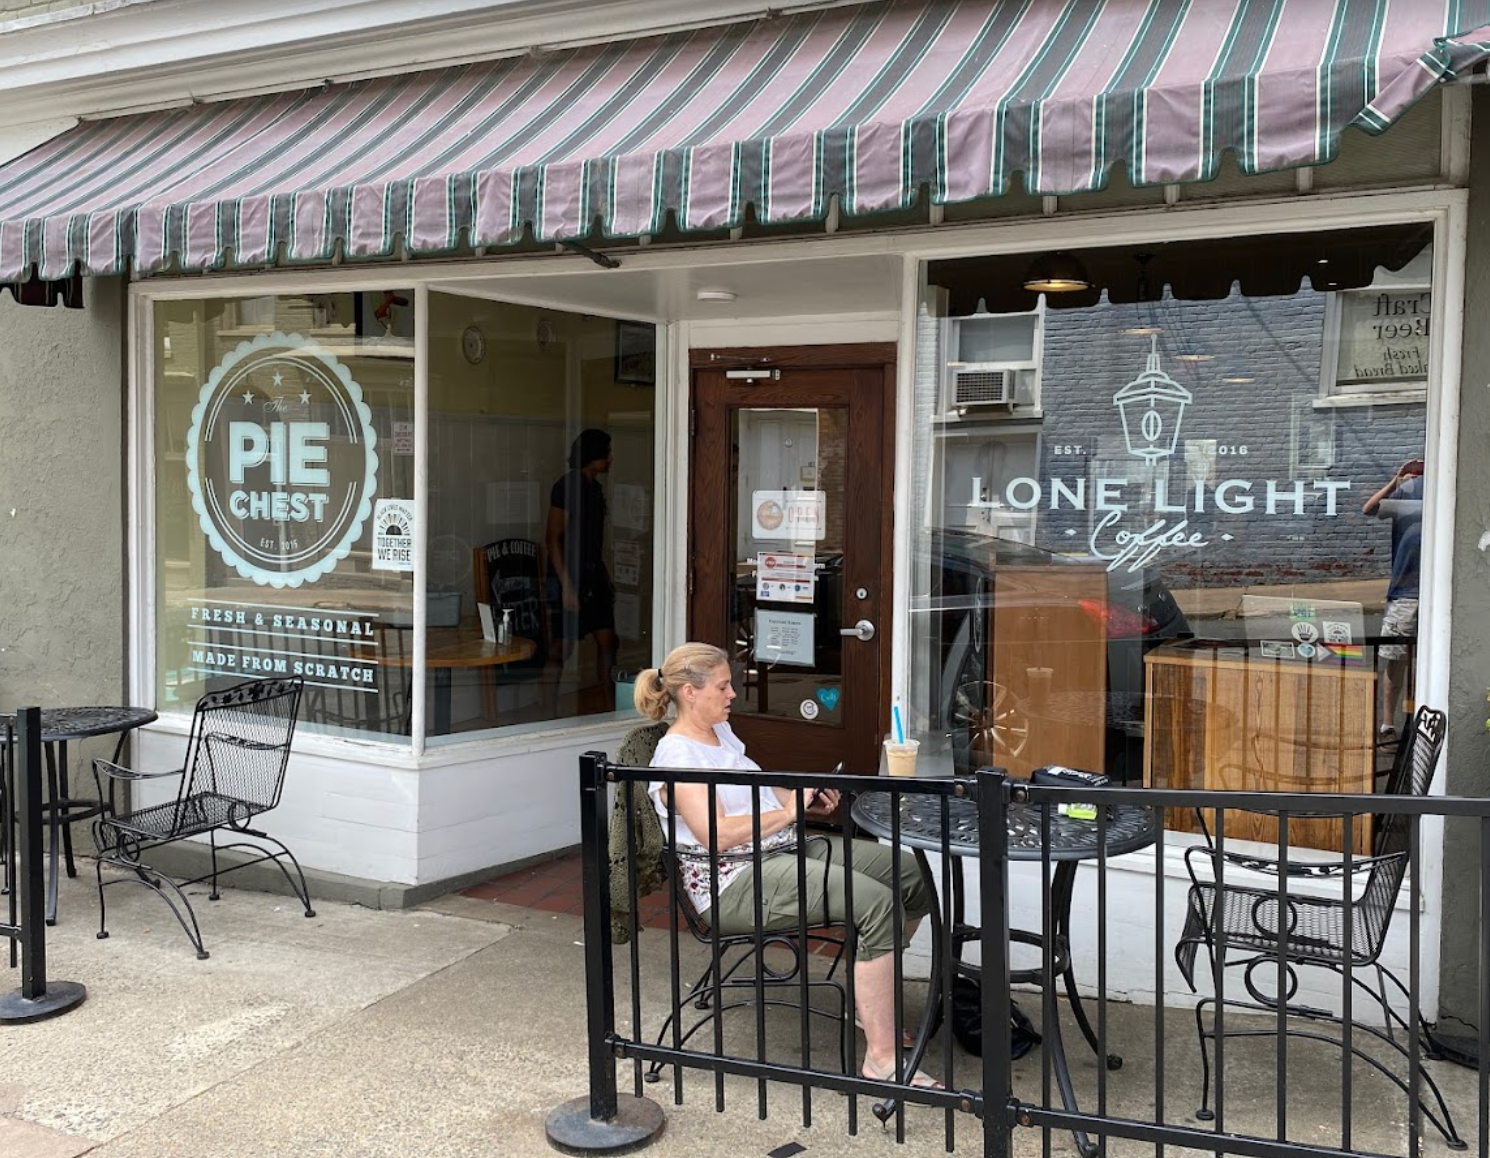 Locals Can’t Get Enough Of The Homemade, Seasonal Pies At The Pie Chest In Virginia